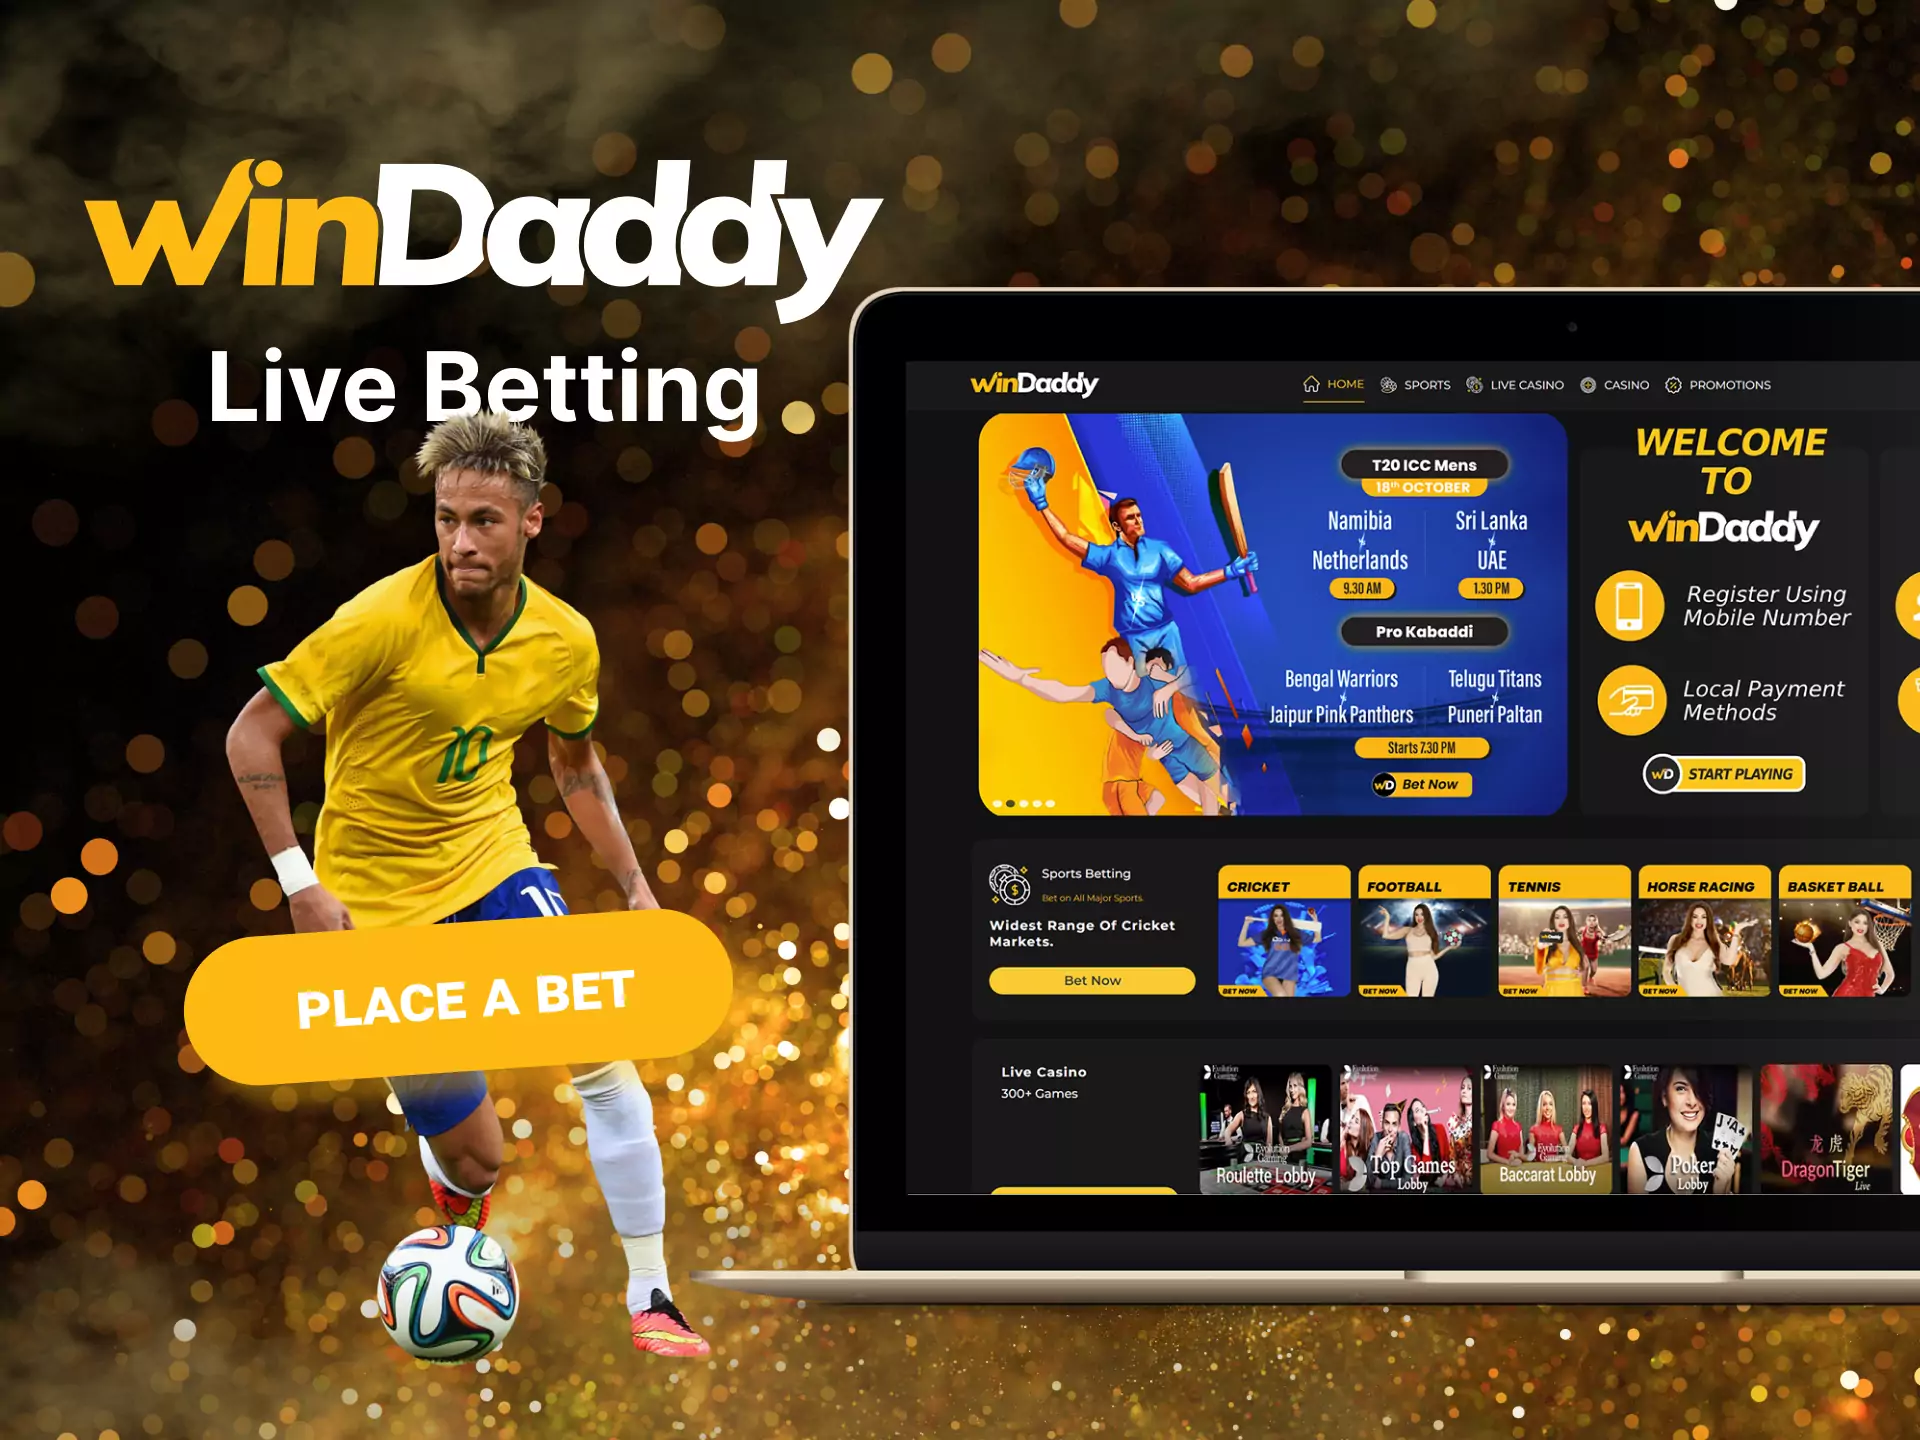 Place bets on popular matches live on Windaddy.